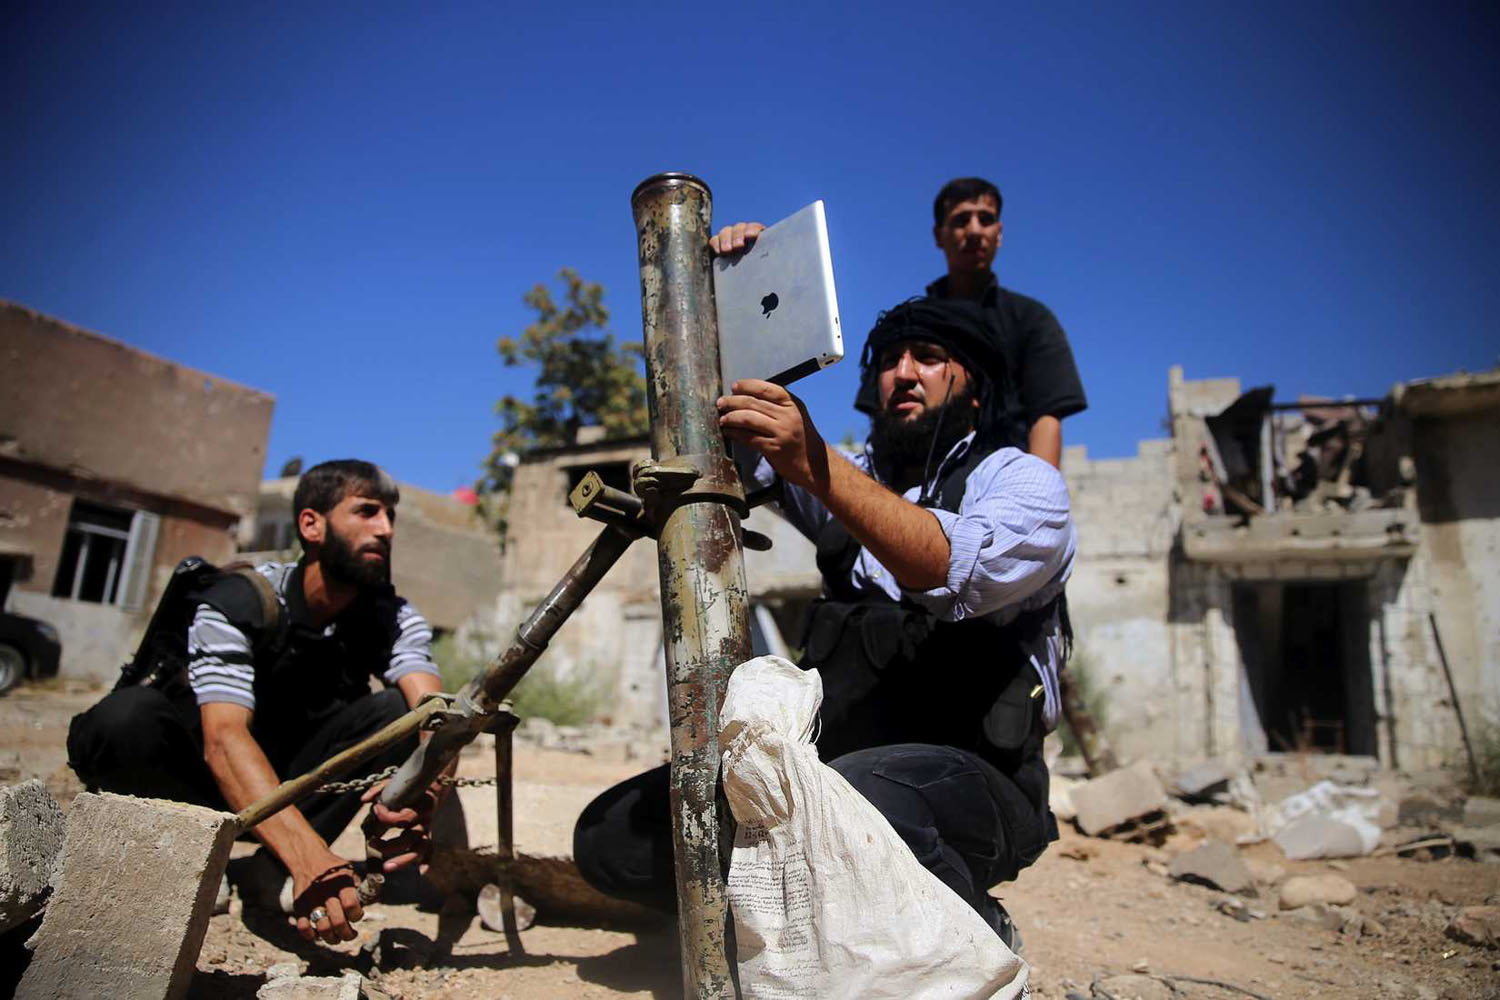 A rebel fighter, who belongs to the Free Syrian Army, uses an iPad during preparations to fire a homemade mortar at a battlefront in Damascus on Sept. 15, 2013